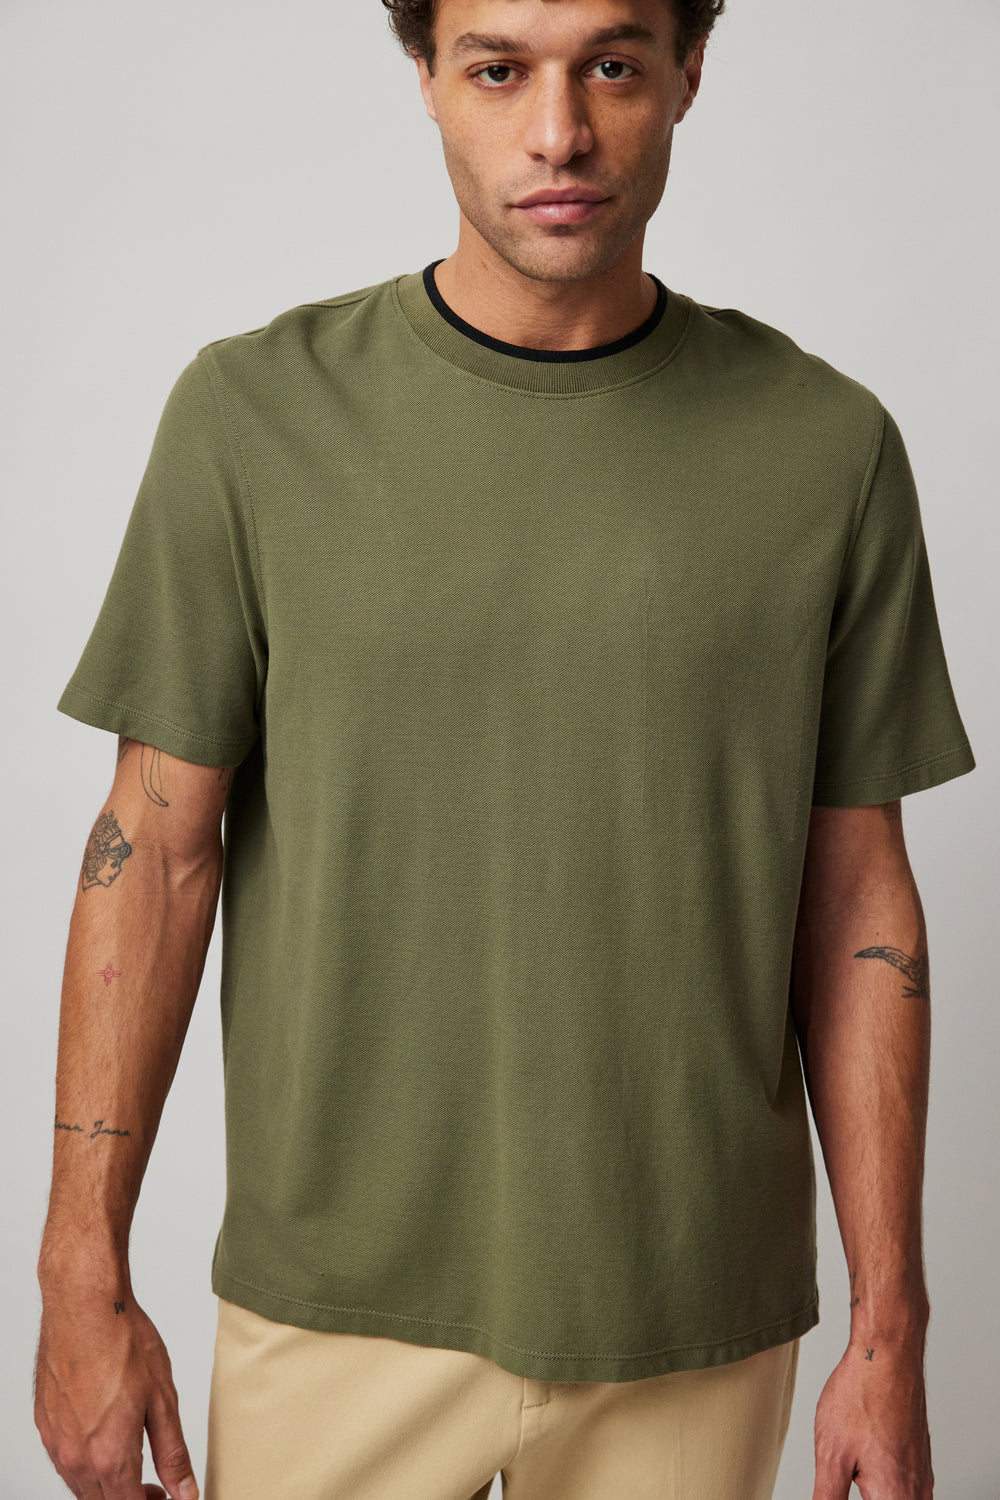 ATM Collection - Men - Army Pique Short Sleeve Tee with Tipping